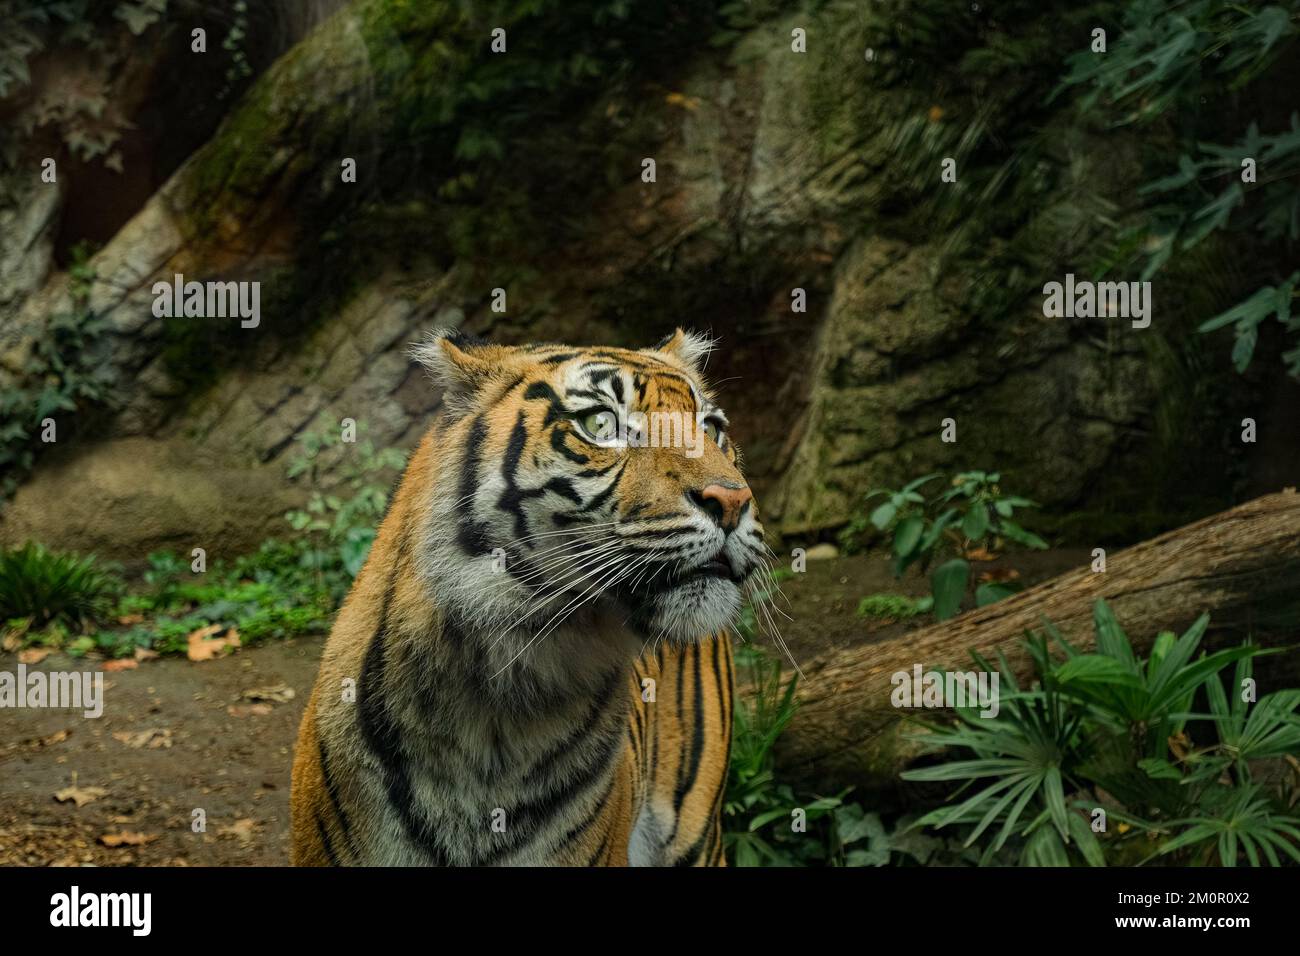 Close up view of striped African Tiger in wild ecosystem,Wildlife feline animals Stock Photo